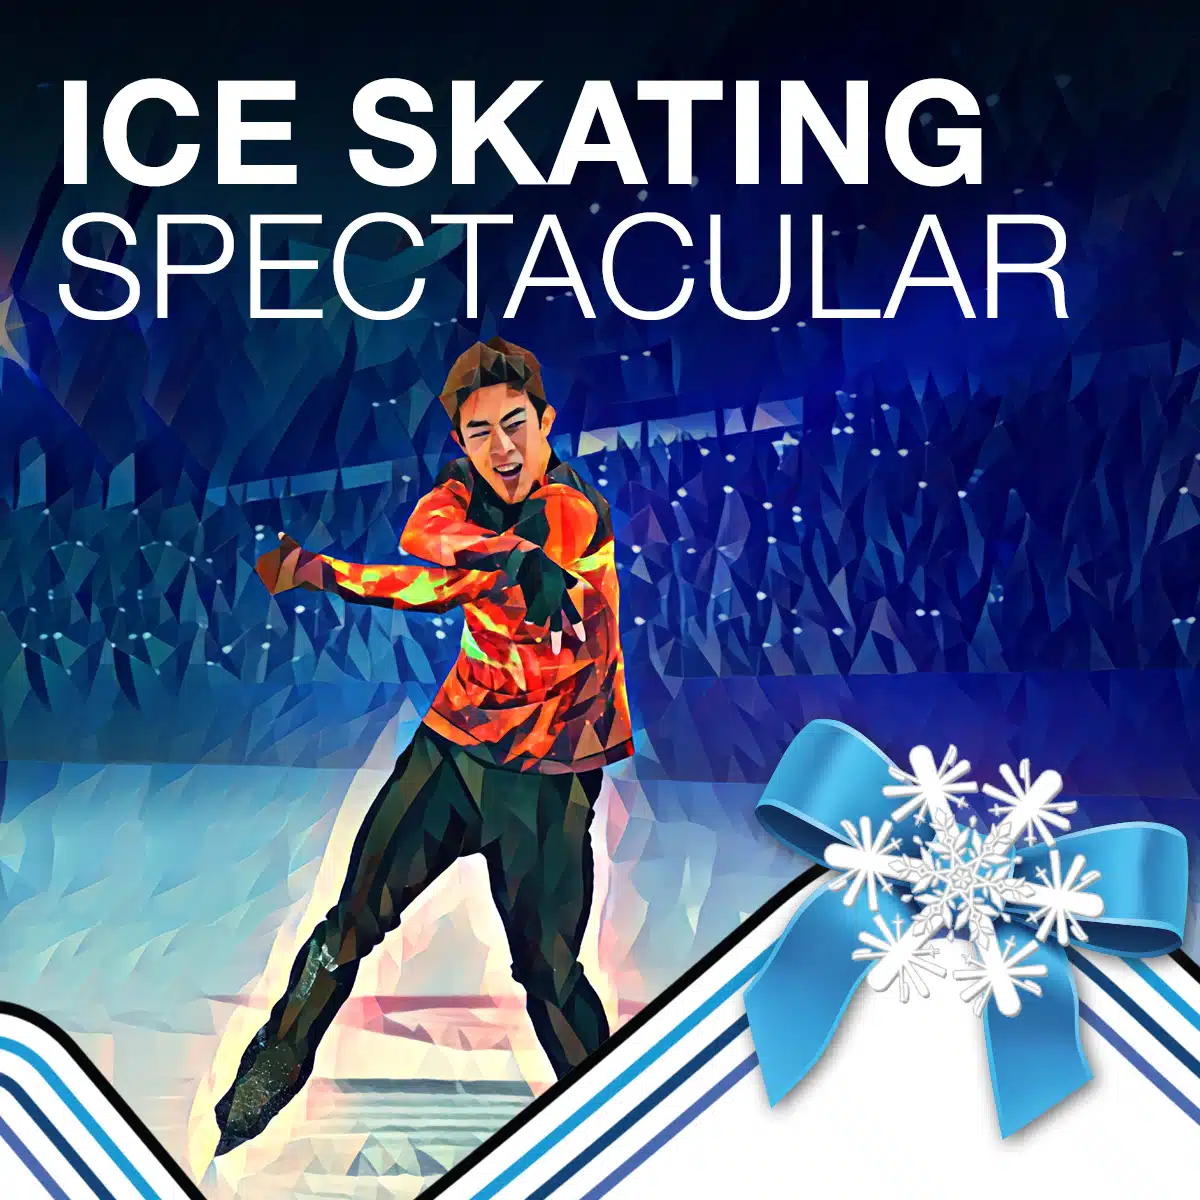 Vail Skating Festival’s Ice Spectacular